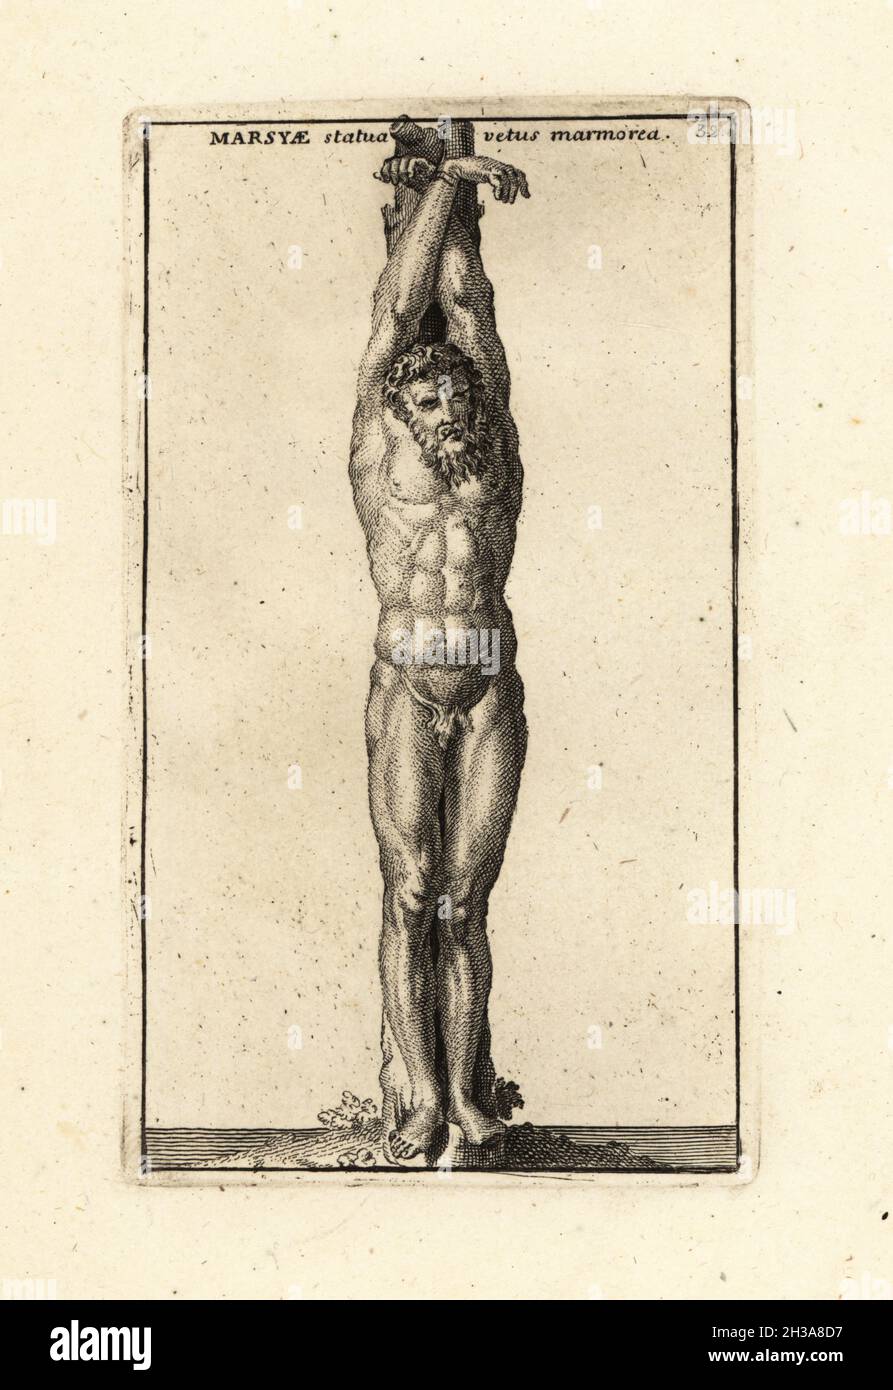 Statue of the satyr Marsyas tied to a tree and flayed alive after a music battle with Apollo. Roman copy from a Greek original of the 4th century BC, now in the Capitoline Museums. Marsyae statua vetus marmorea. Copperplate engraving by Giovanni Battista Cannetti from Copperplates of the most beautiful ancient statues of Rome, Calcografia di piu belle statue antiche a Roma, engraved by Cannetti all'Arco della Ciambella, published by Gaetano Quojani, Rome, 1779. Stock Photo